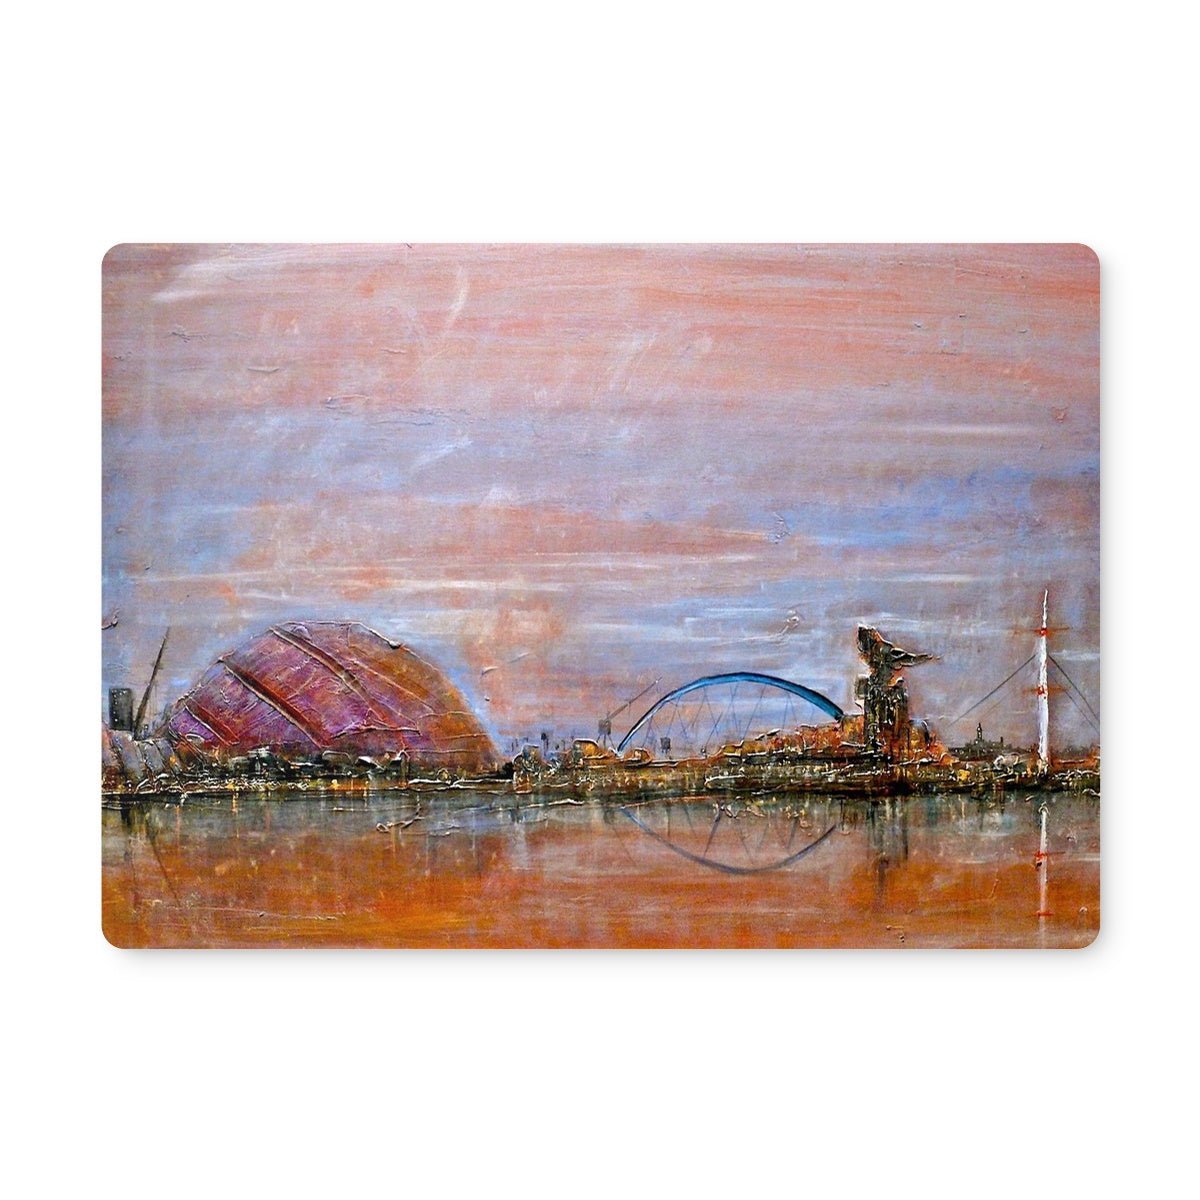 Glasgow Harbour Art Gifts Placemat-Placemats-Edinburgh & Glasgow Art Gallery-6 Placemats-Paintings, Prints, Homeware, Art Gifts From Scotland By Scottish Artist Kevin Hunter